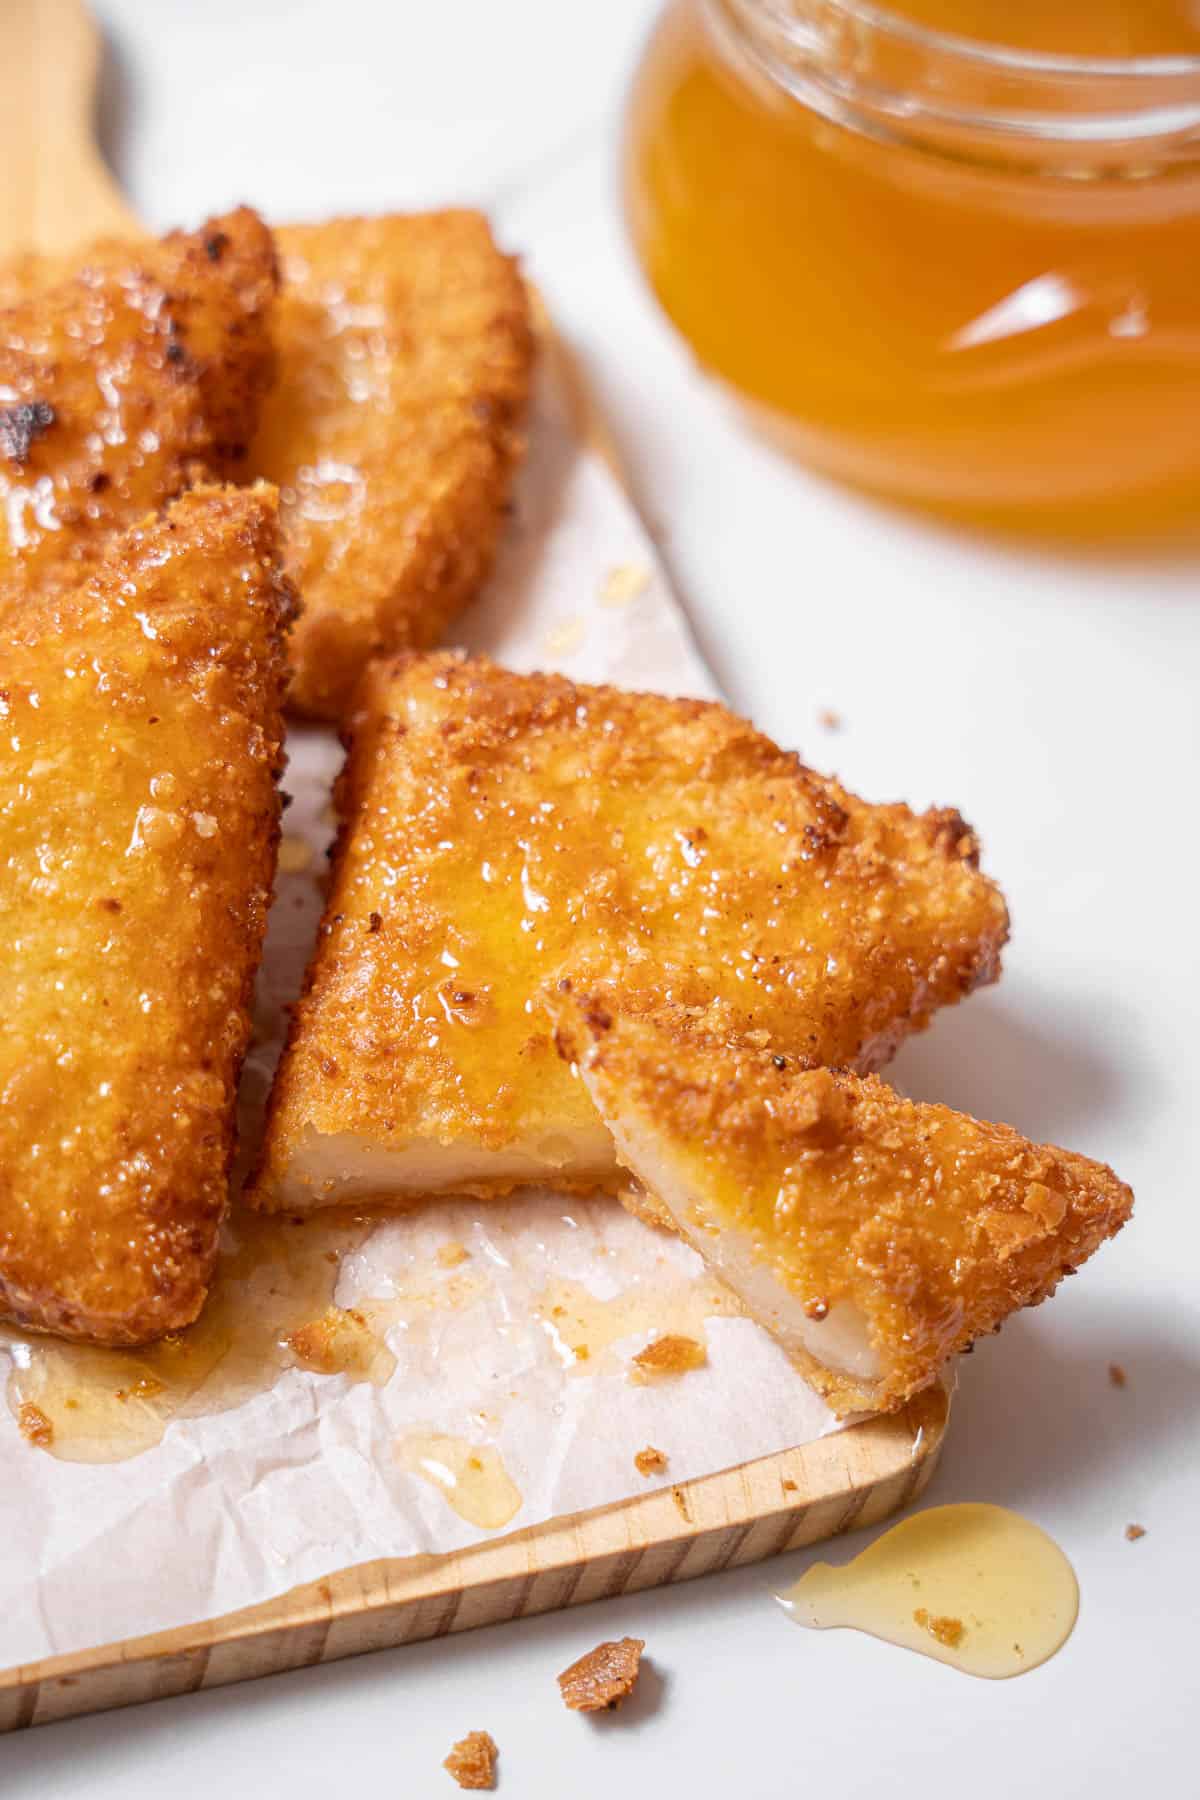 slices of fried goat cheese with honey.